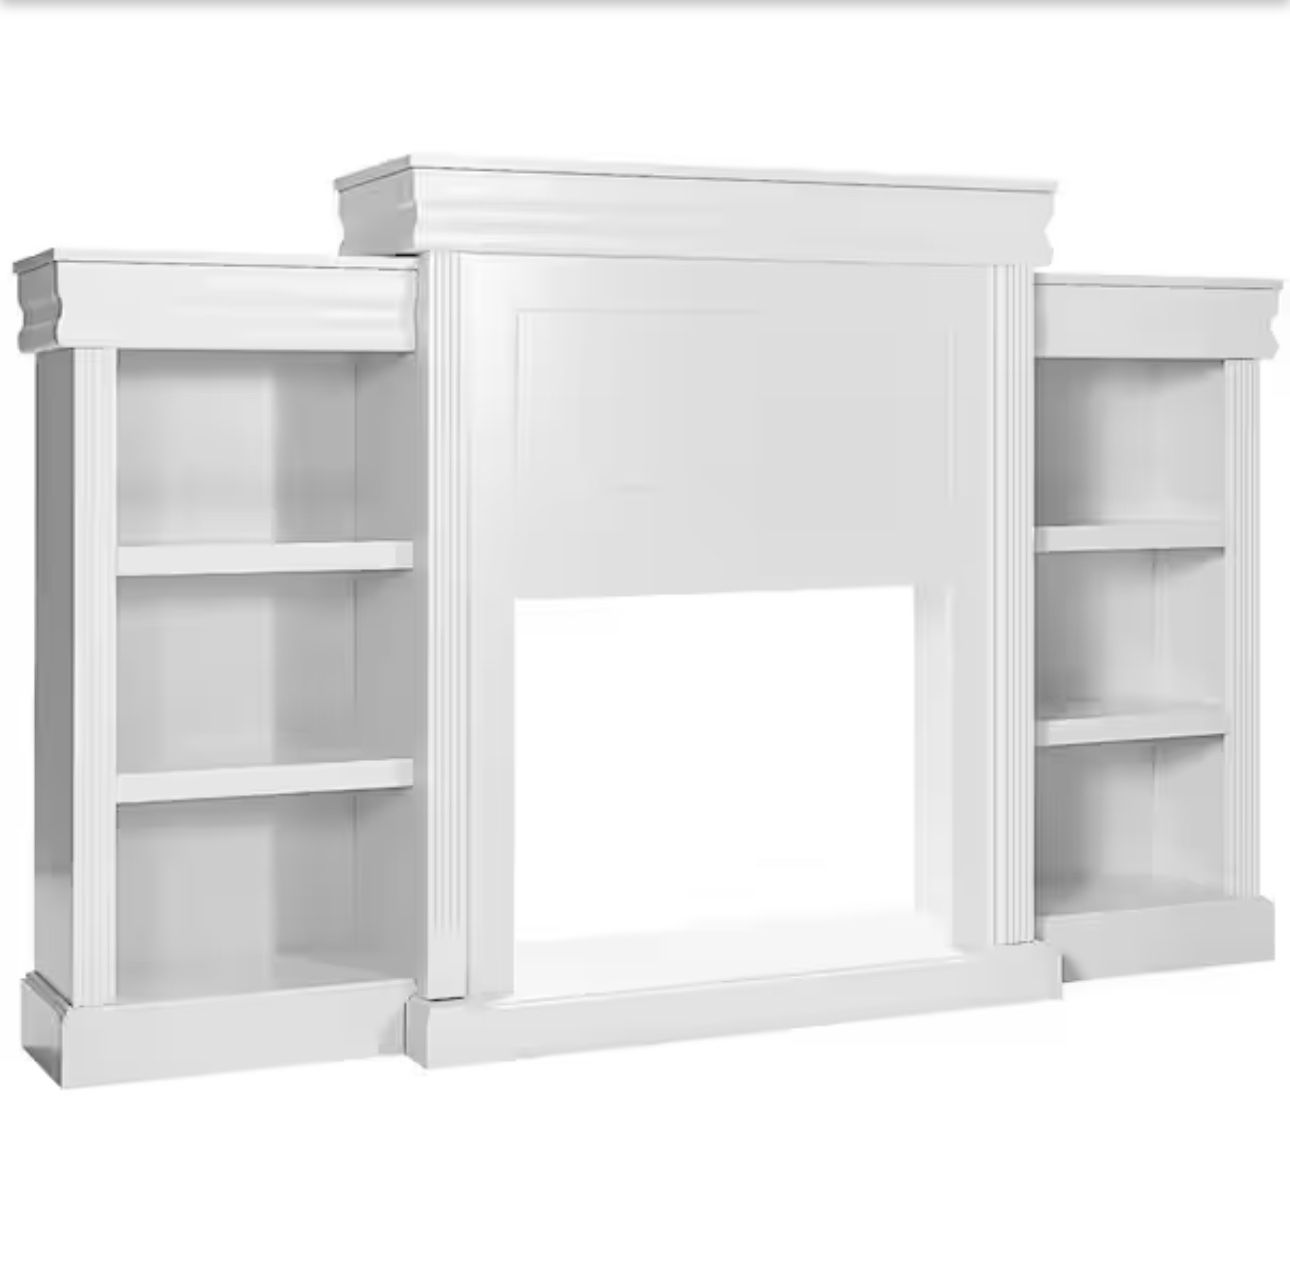 Brand new 70 in.white Fireplace Tv stand